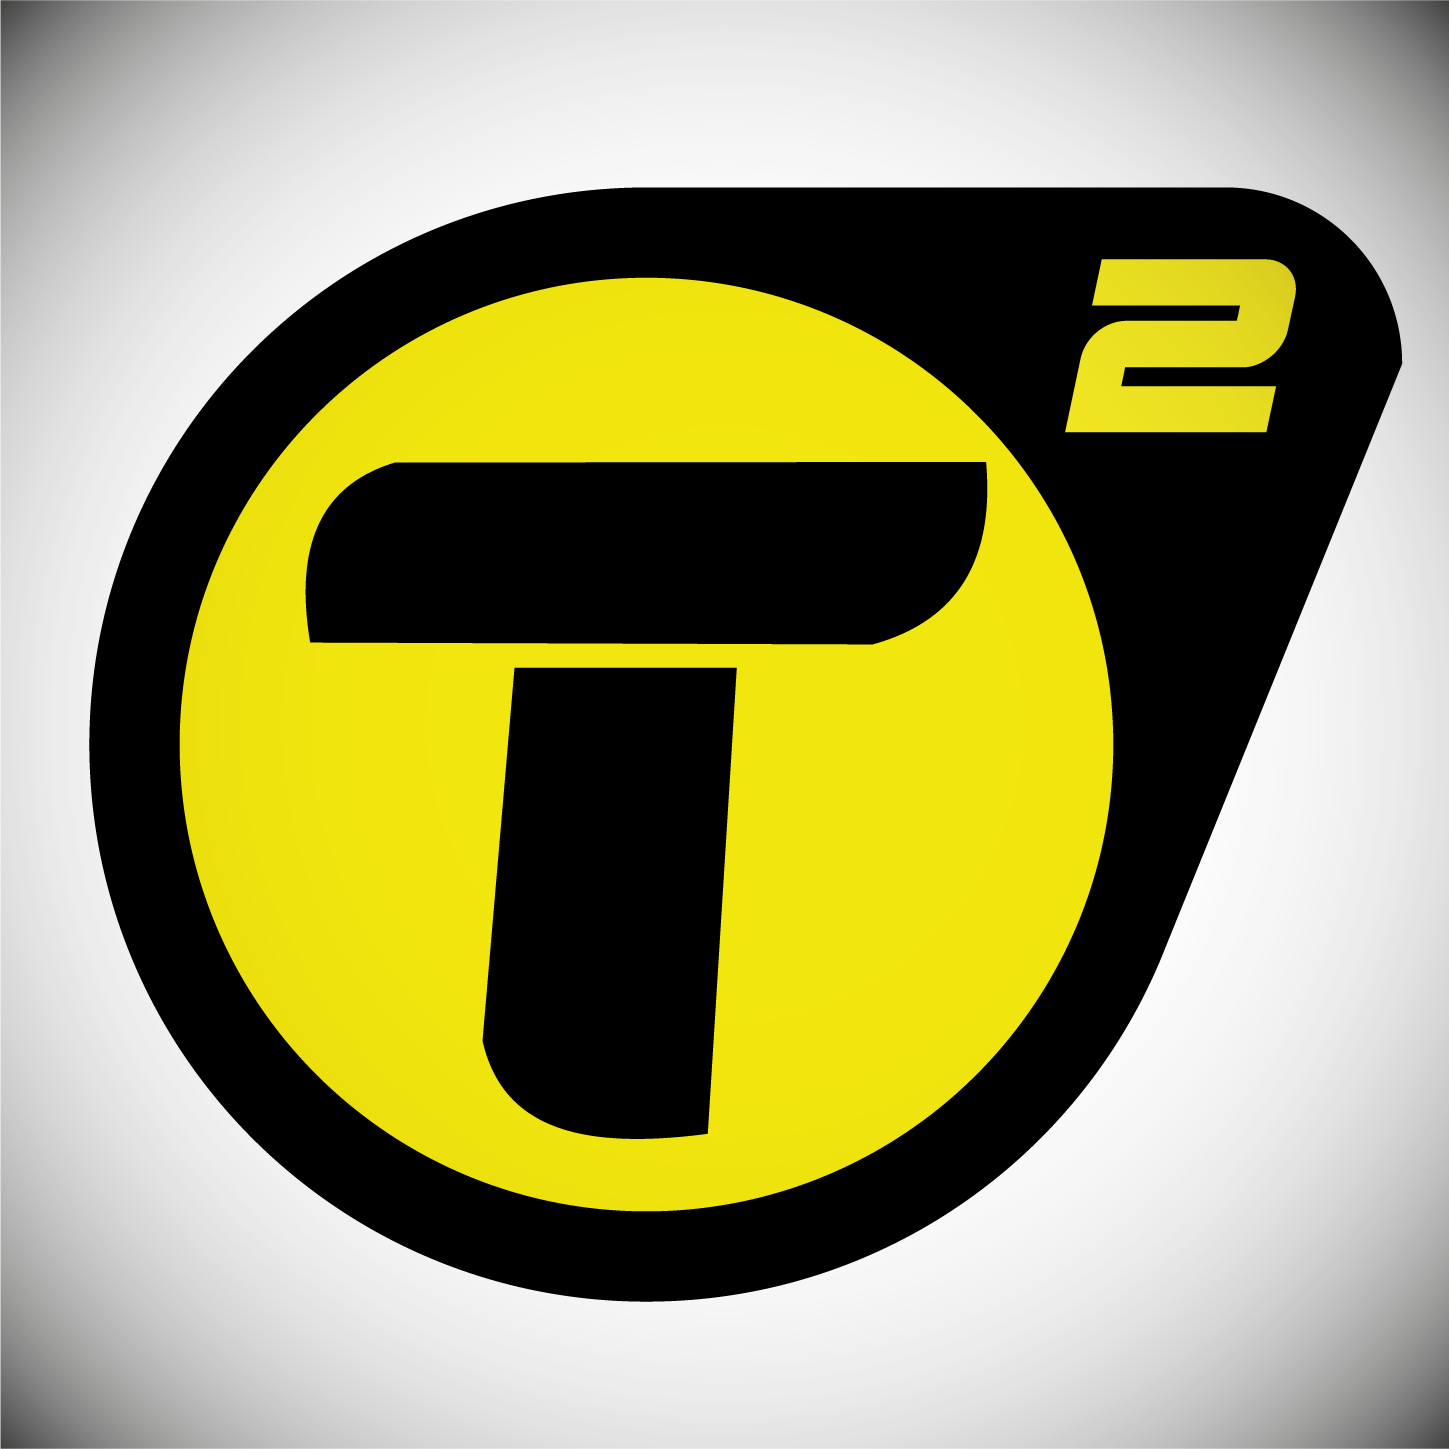 Small yellow and black site icon